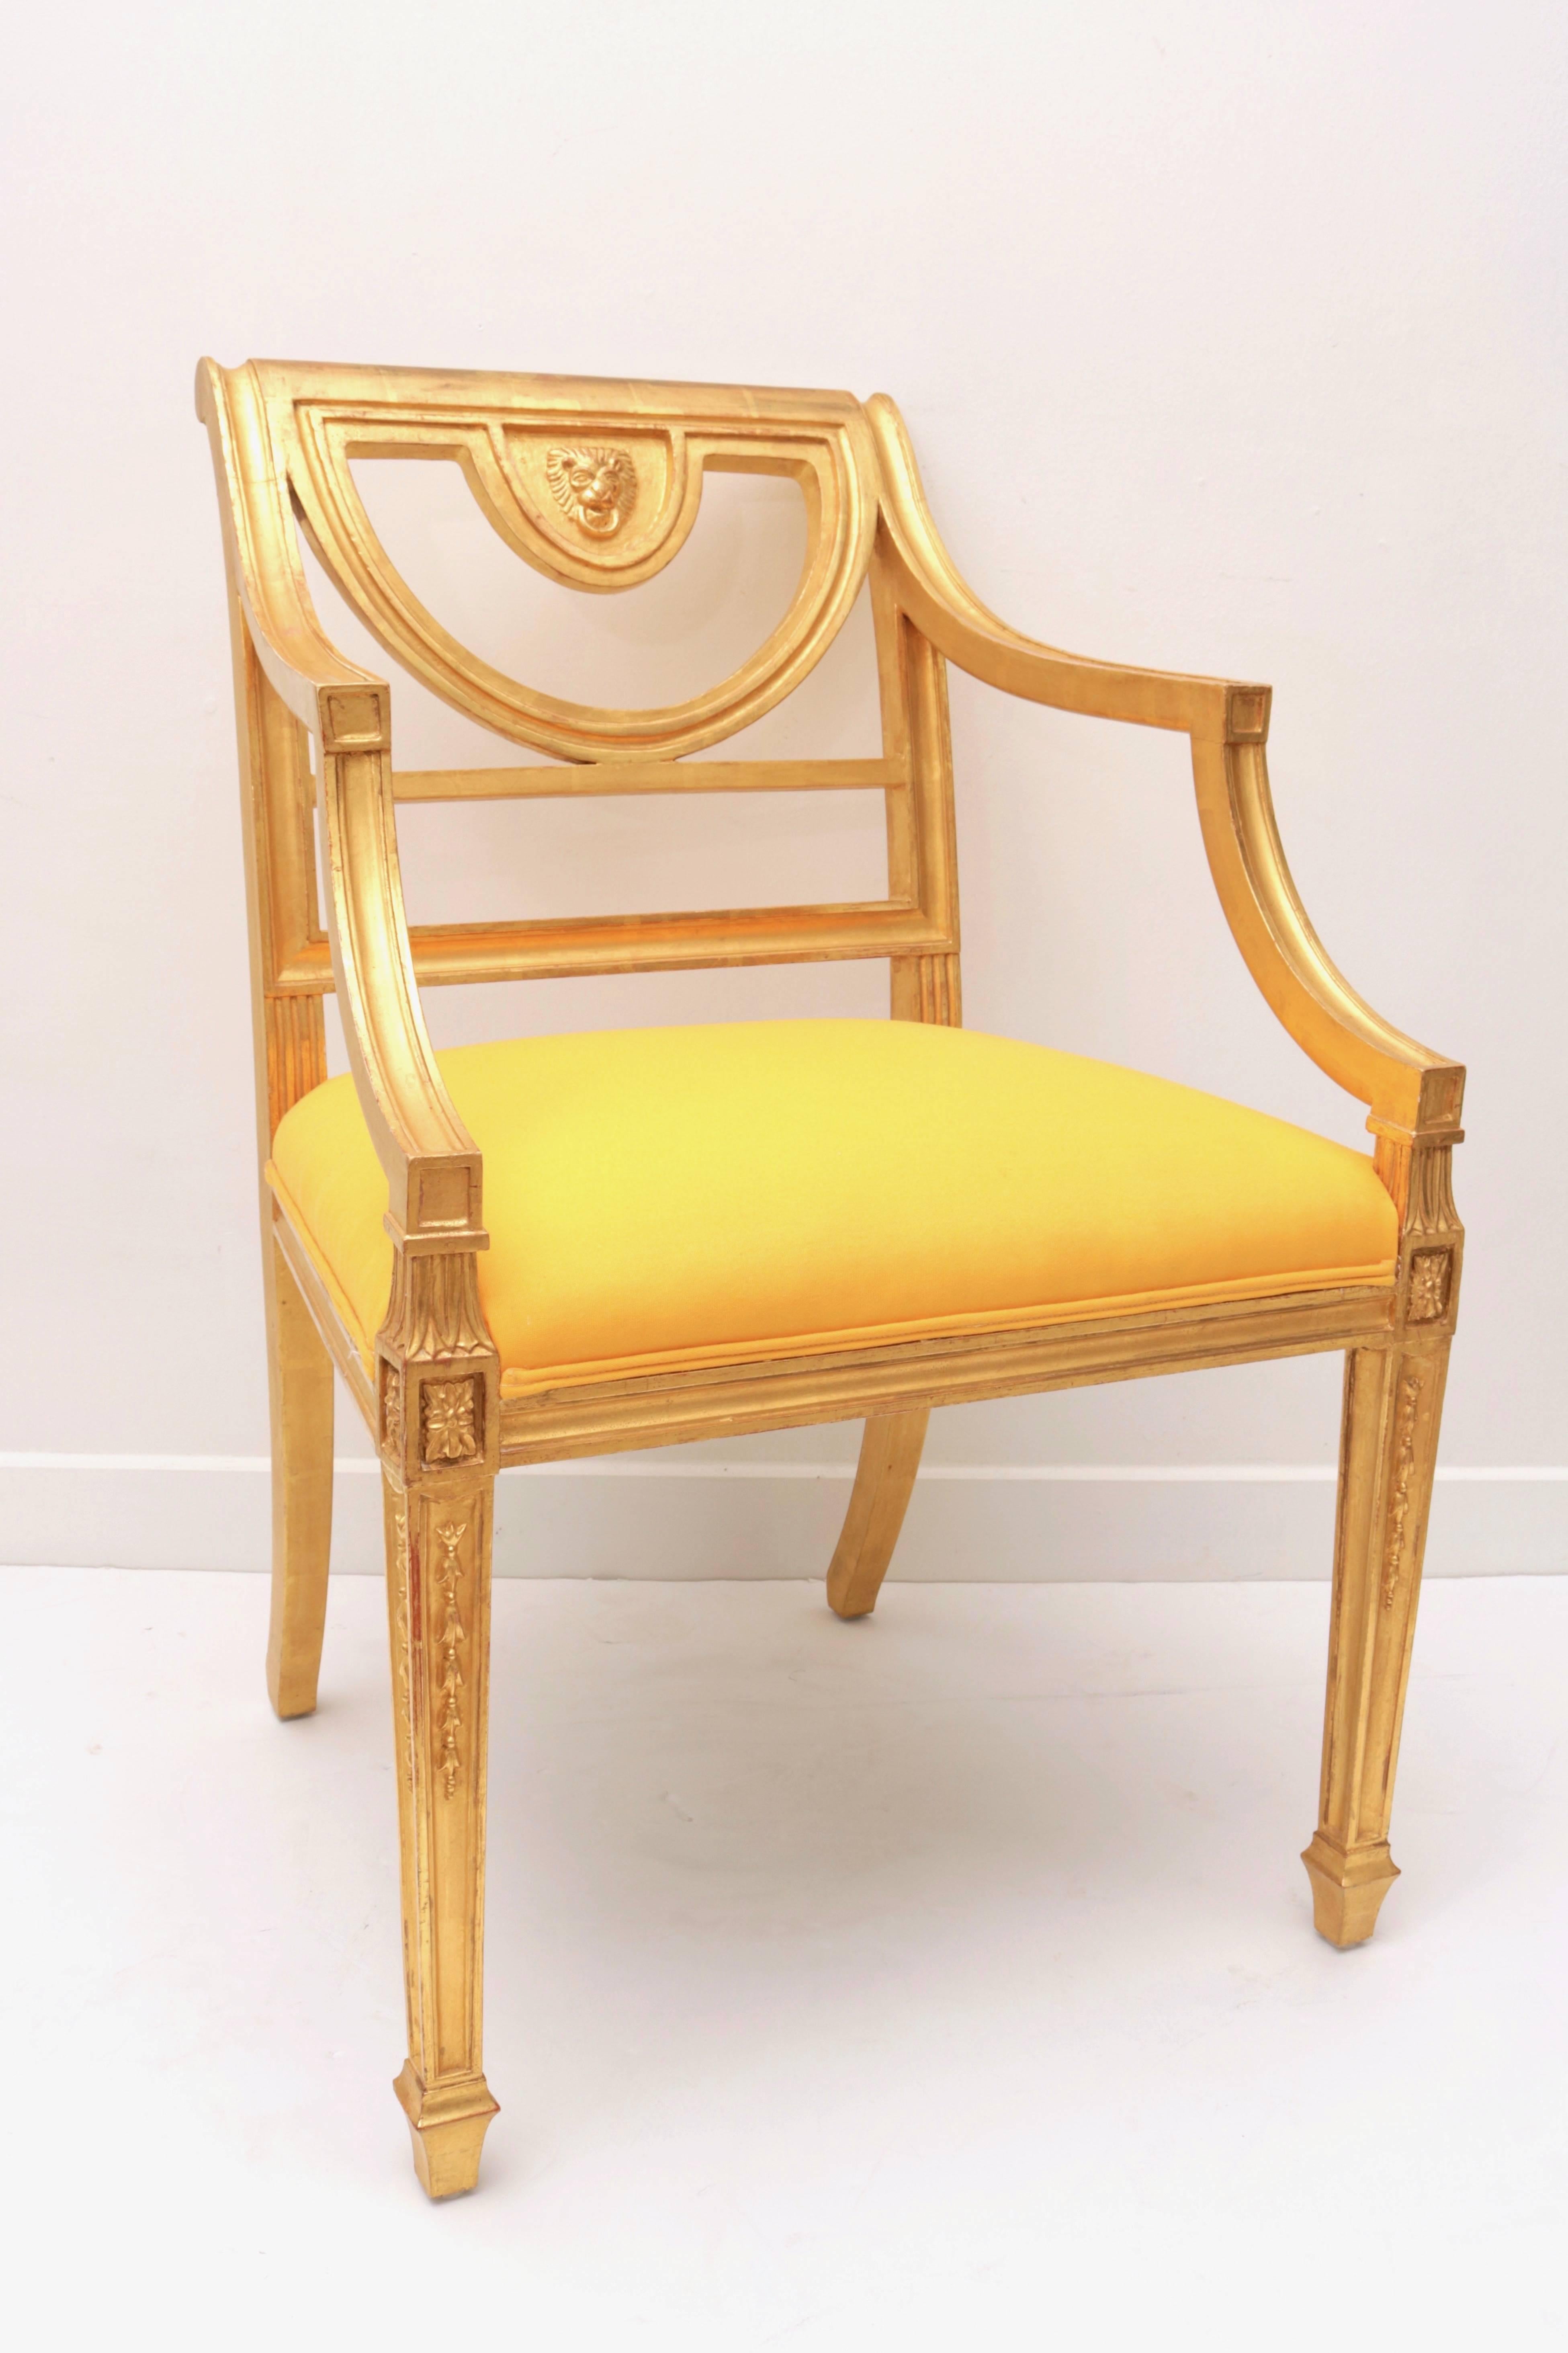 The set of 16 dining chairs will make the perfect perch for your dining room or salon with their Italian frames in parcel-gilt gold and the upholstery fabric in soft marigold color.
 
Note: Dimensions of the four (4) side chairs are 33.50"